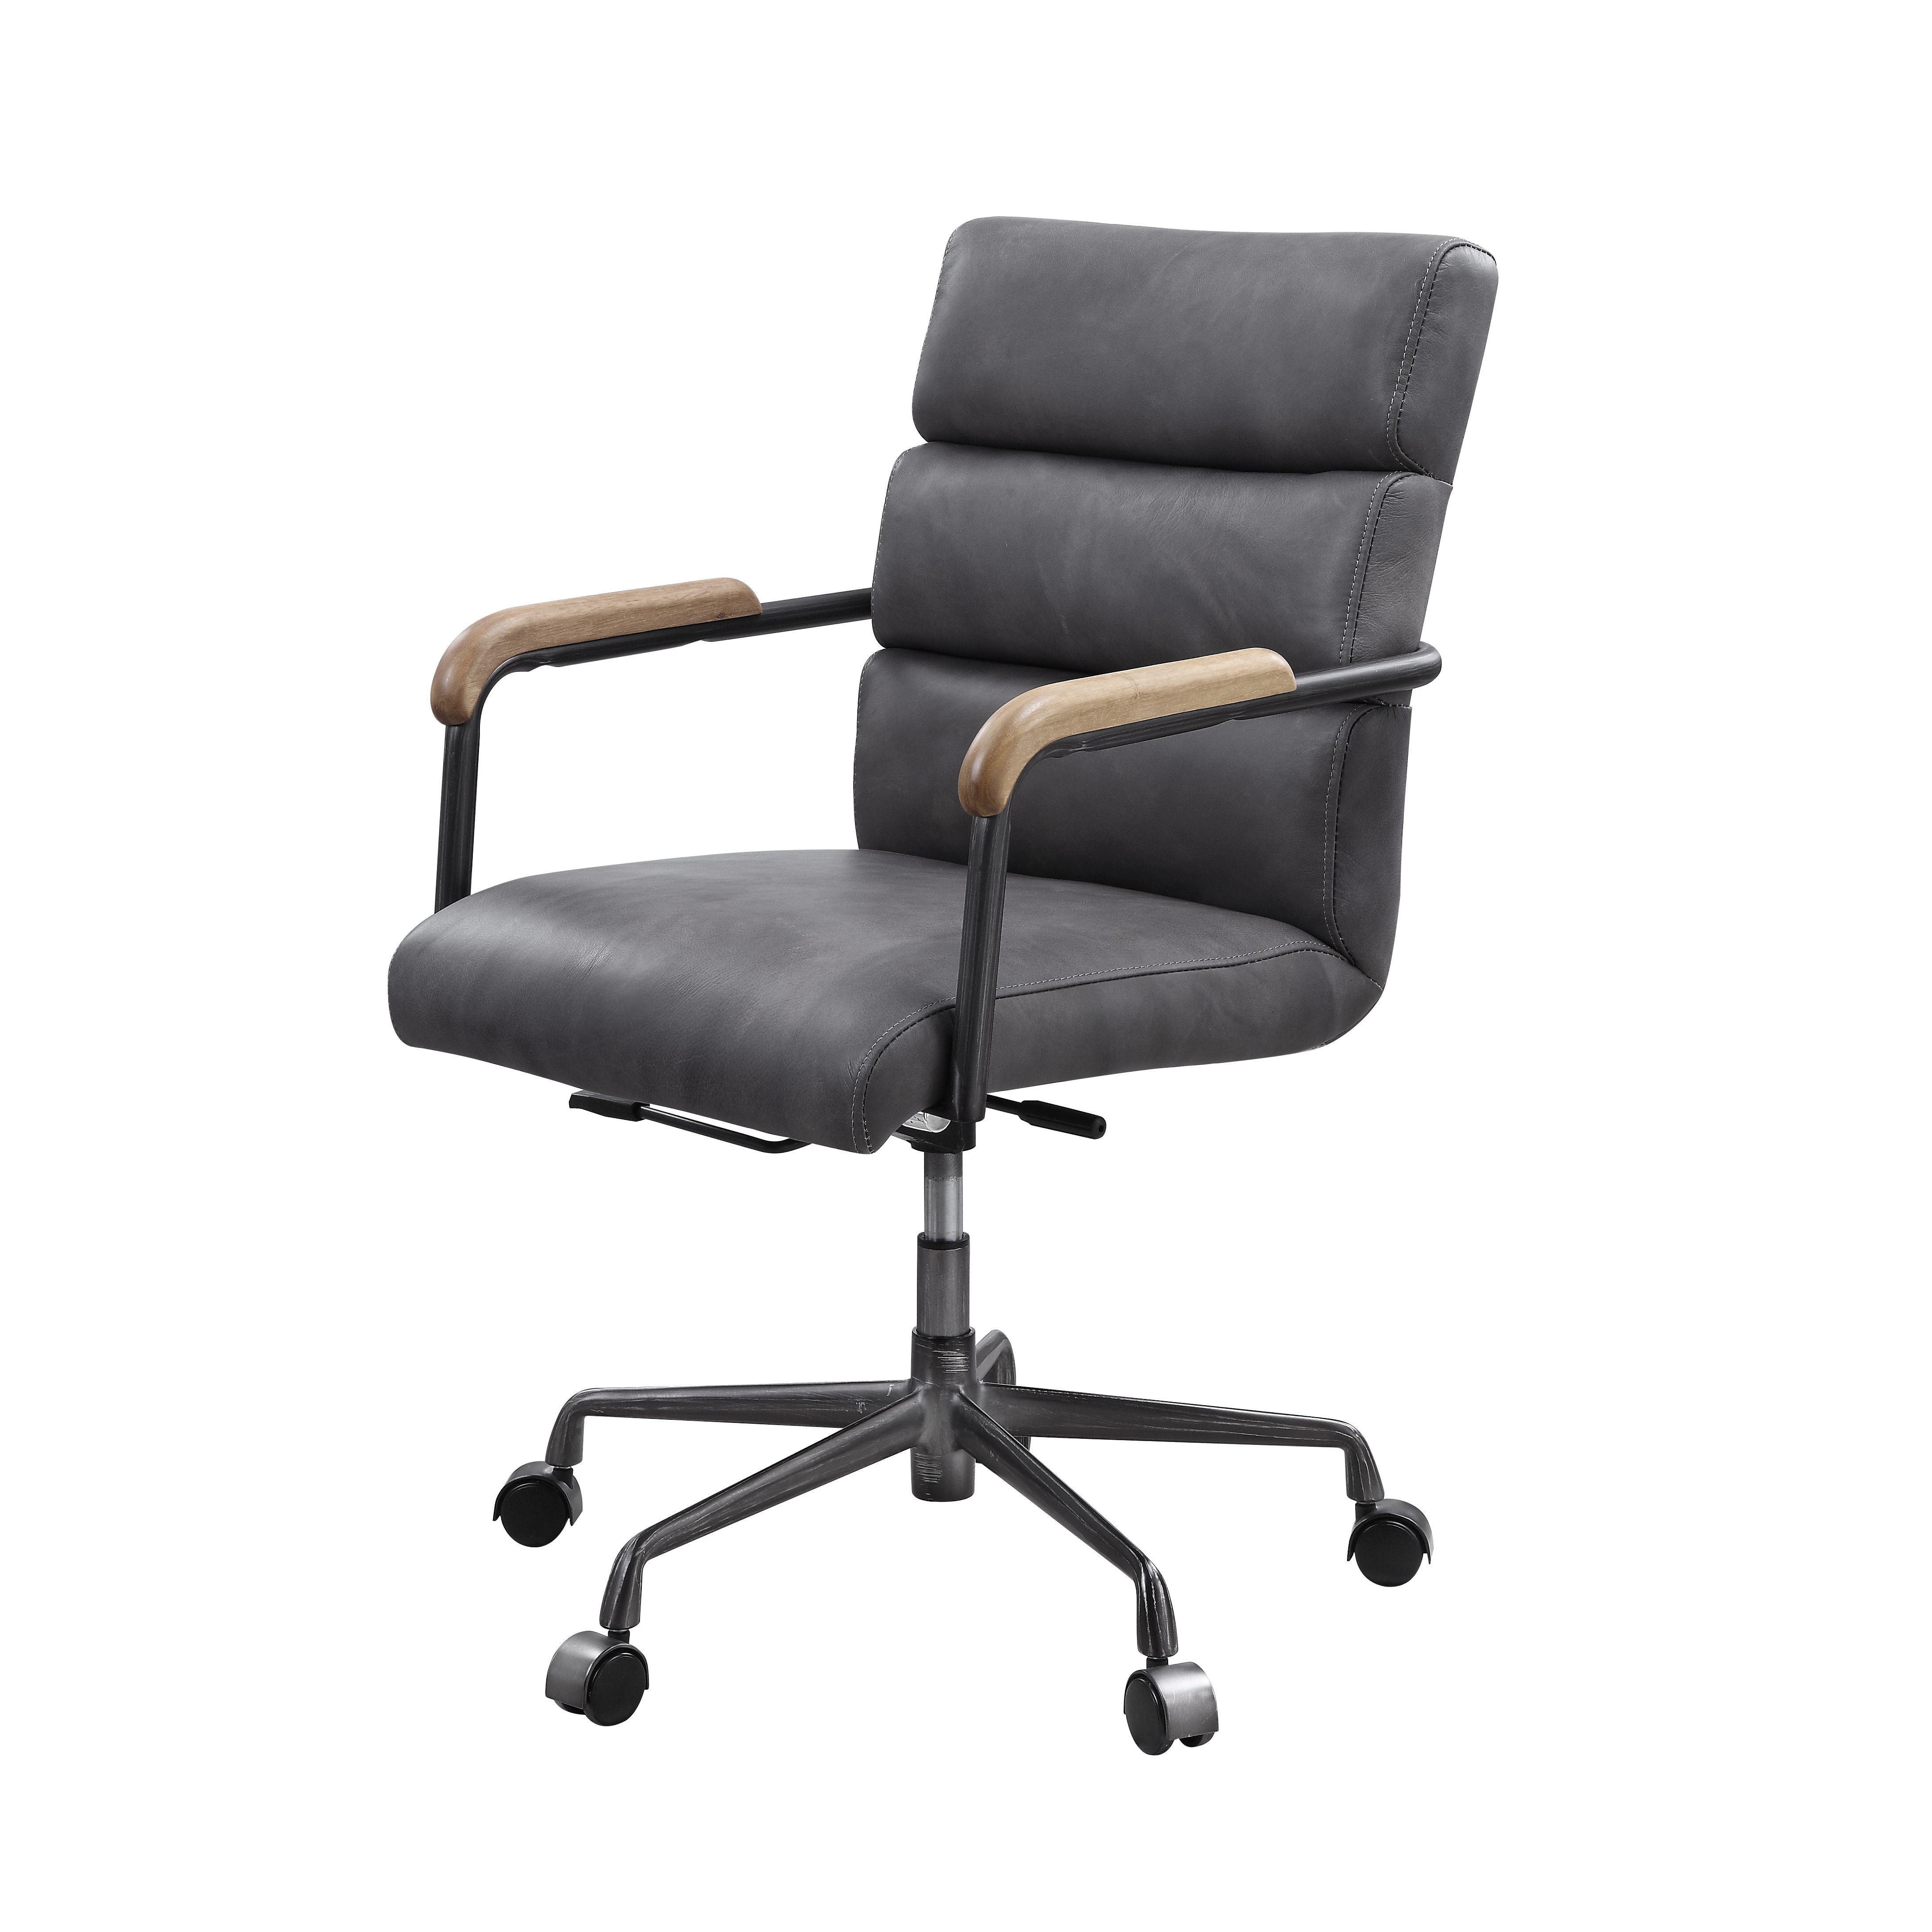 Modern Office Chair Halcyon 93242 in Gray Top grain leather